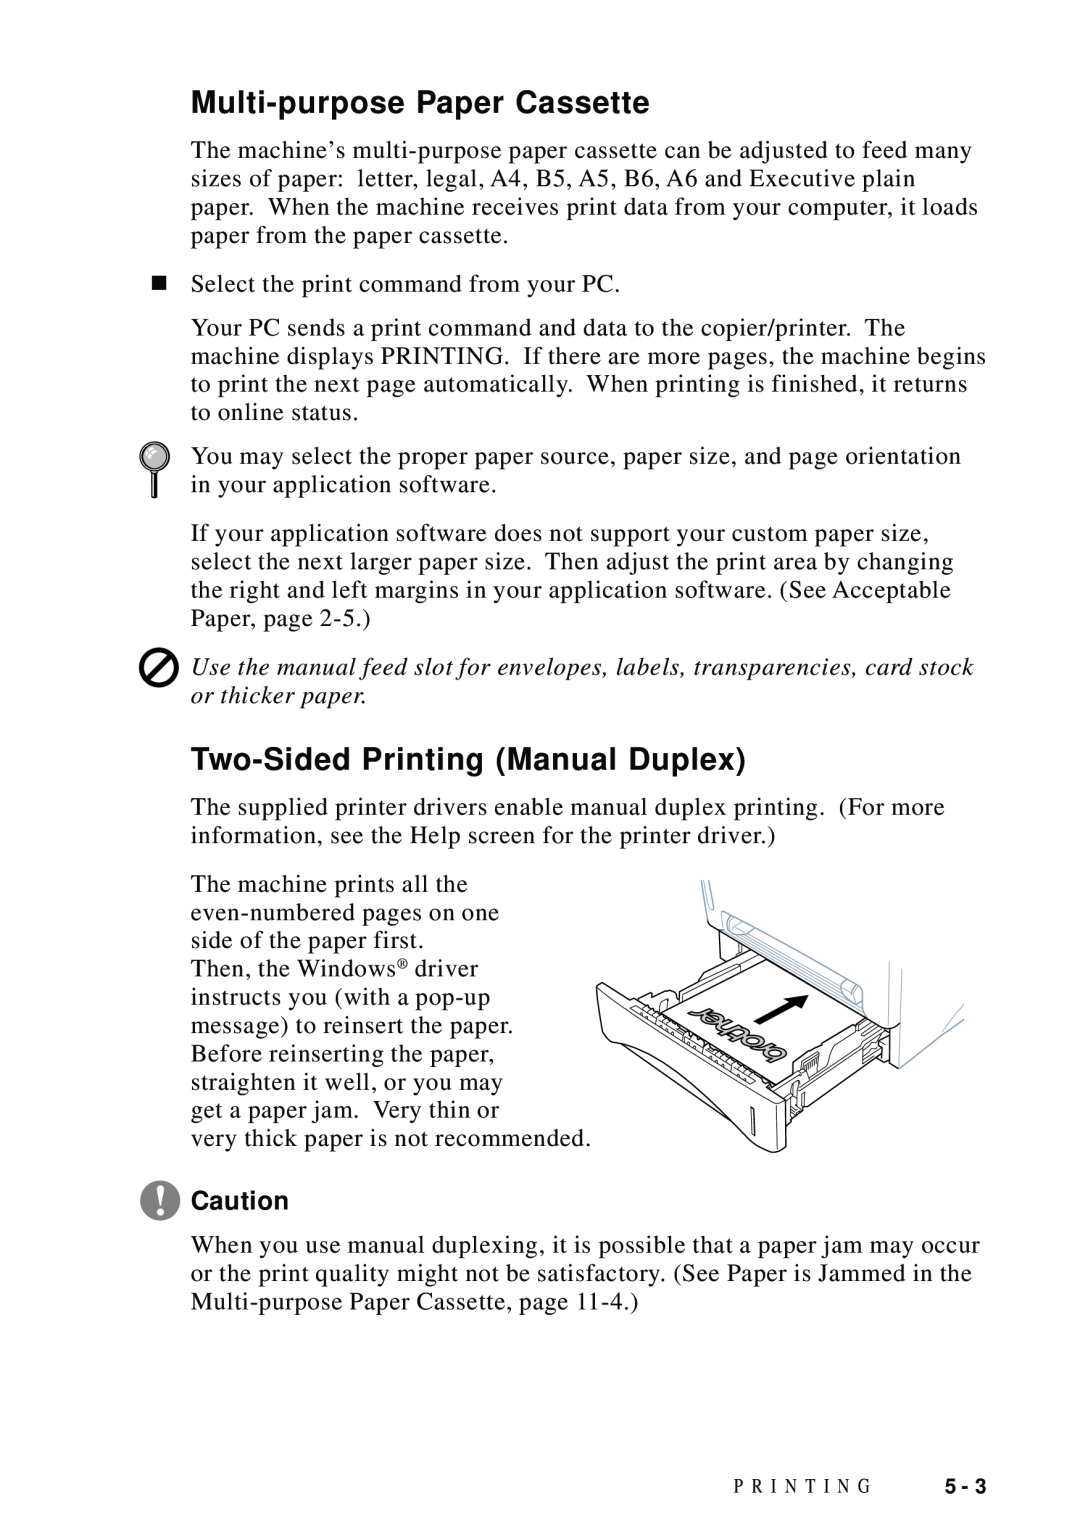 Brother DCP1200 manual Multi-purpose Paper Cassette, Two-Sided Printing Manual Duplex 